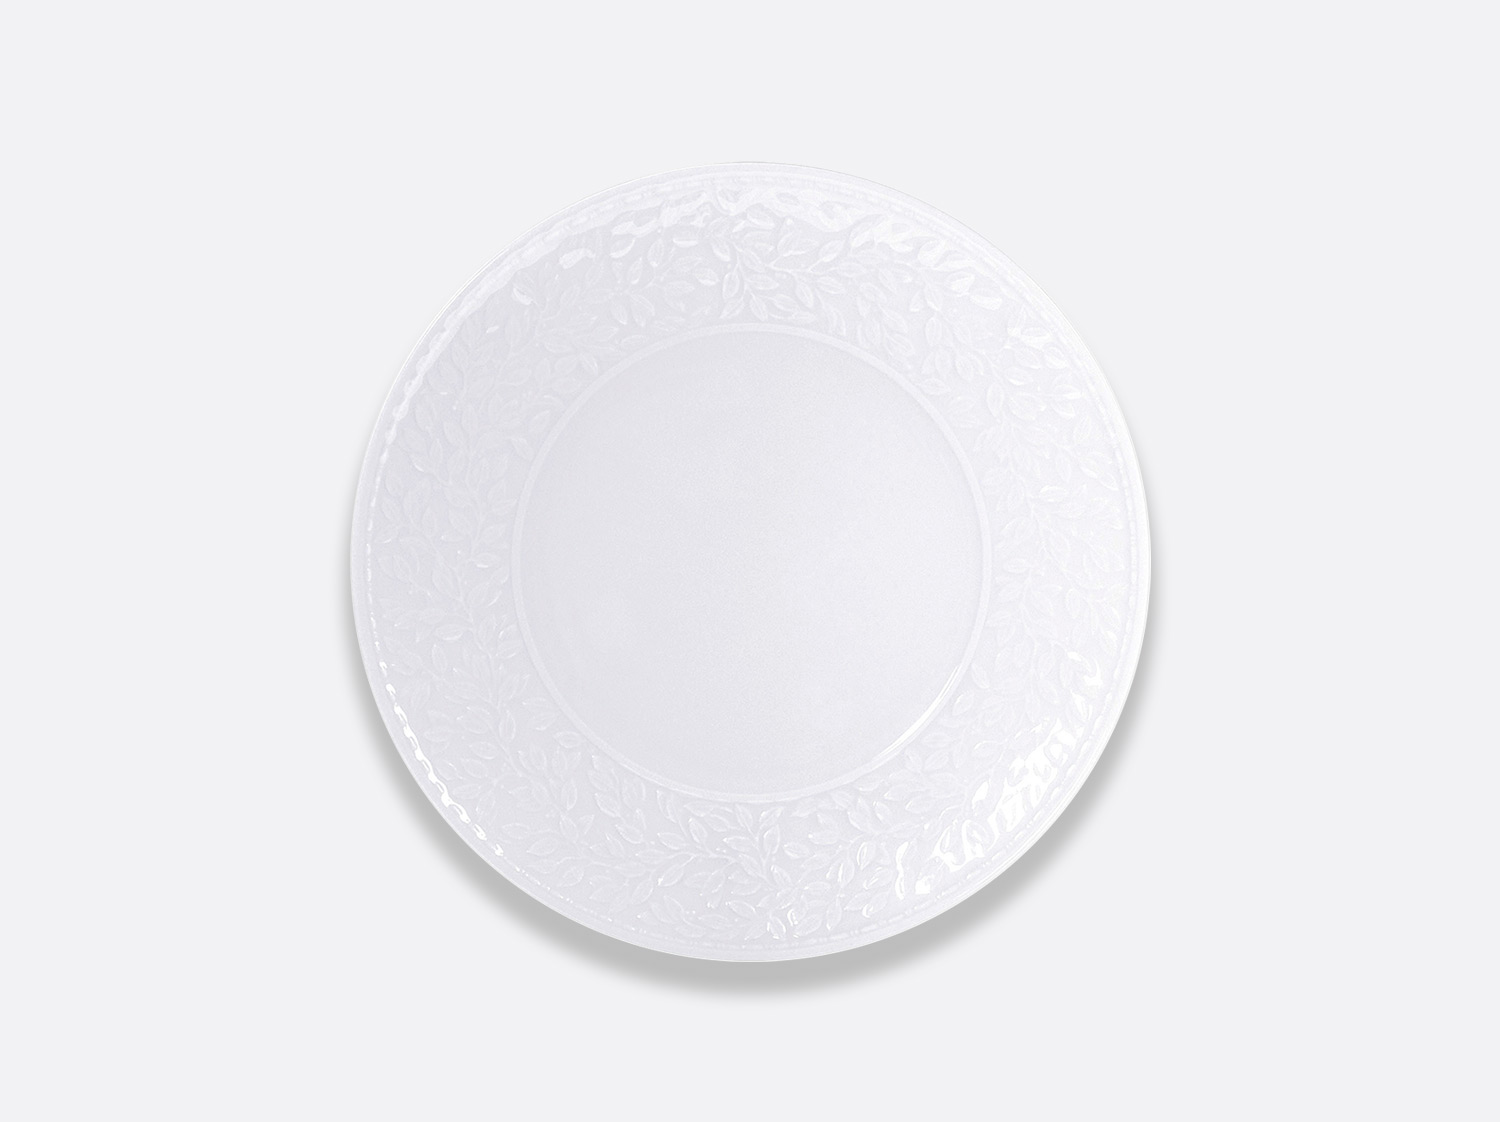 China Coupe salad plate 8.5" of the collection Louvre | Bernardaud